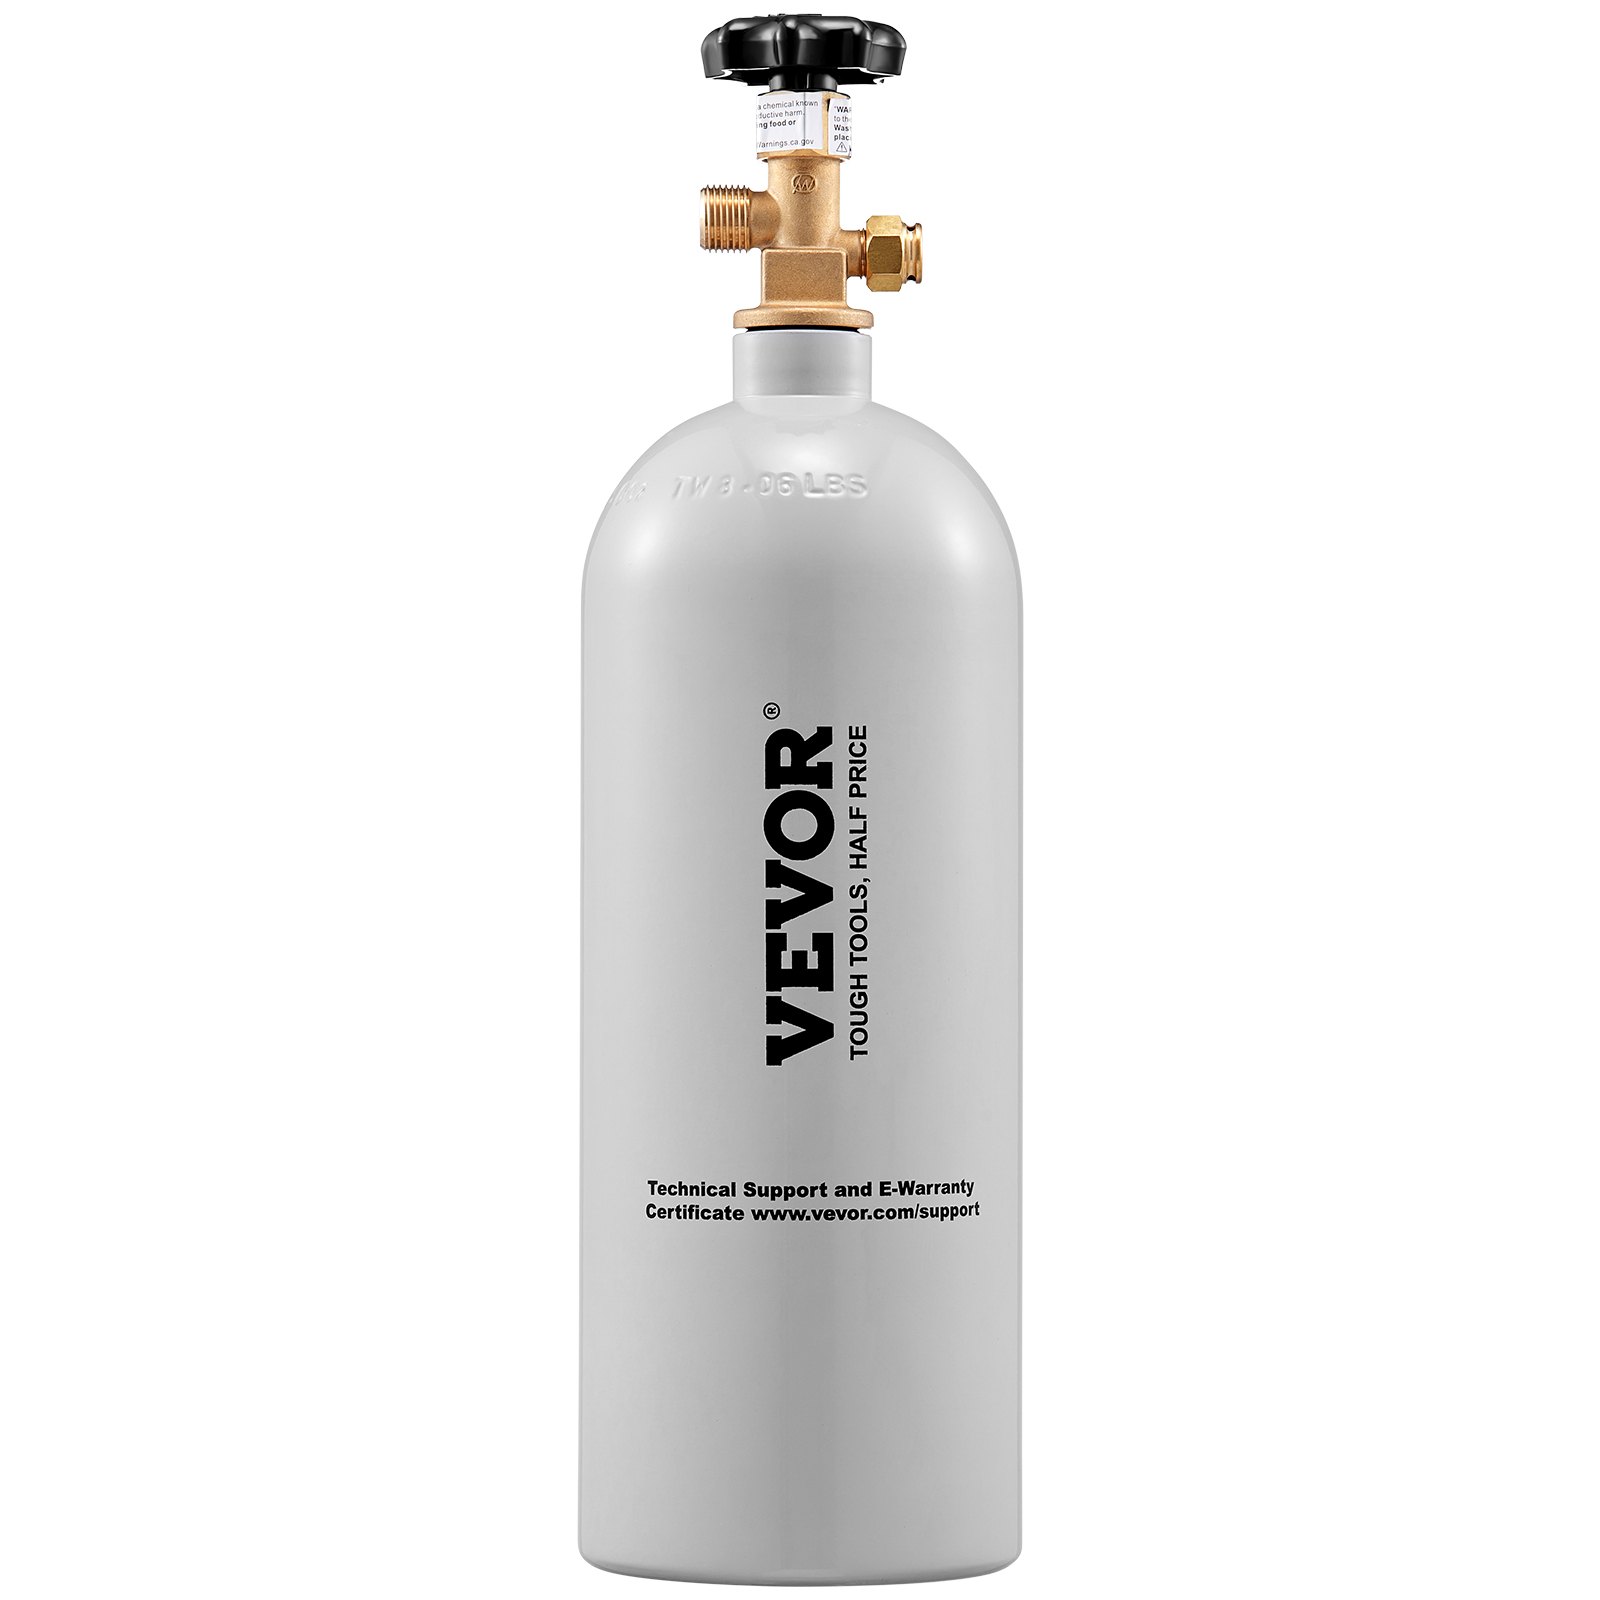 VEVOR 5 Lbs CO2 Tank Aluminum Gas Cylinder, Brand New CO2 Cylinder with